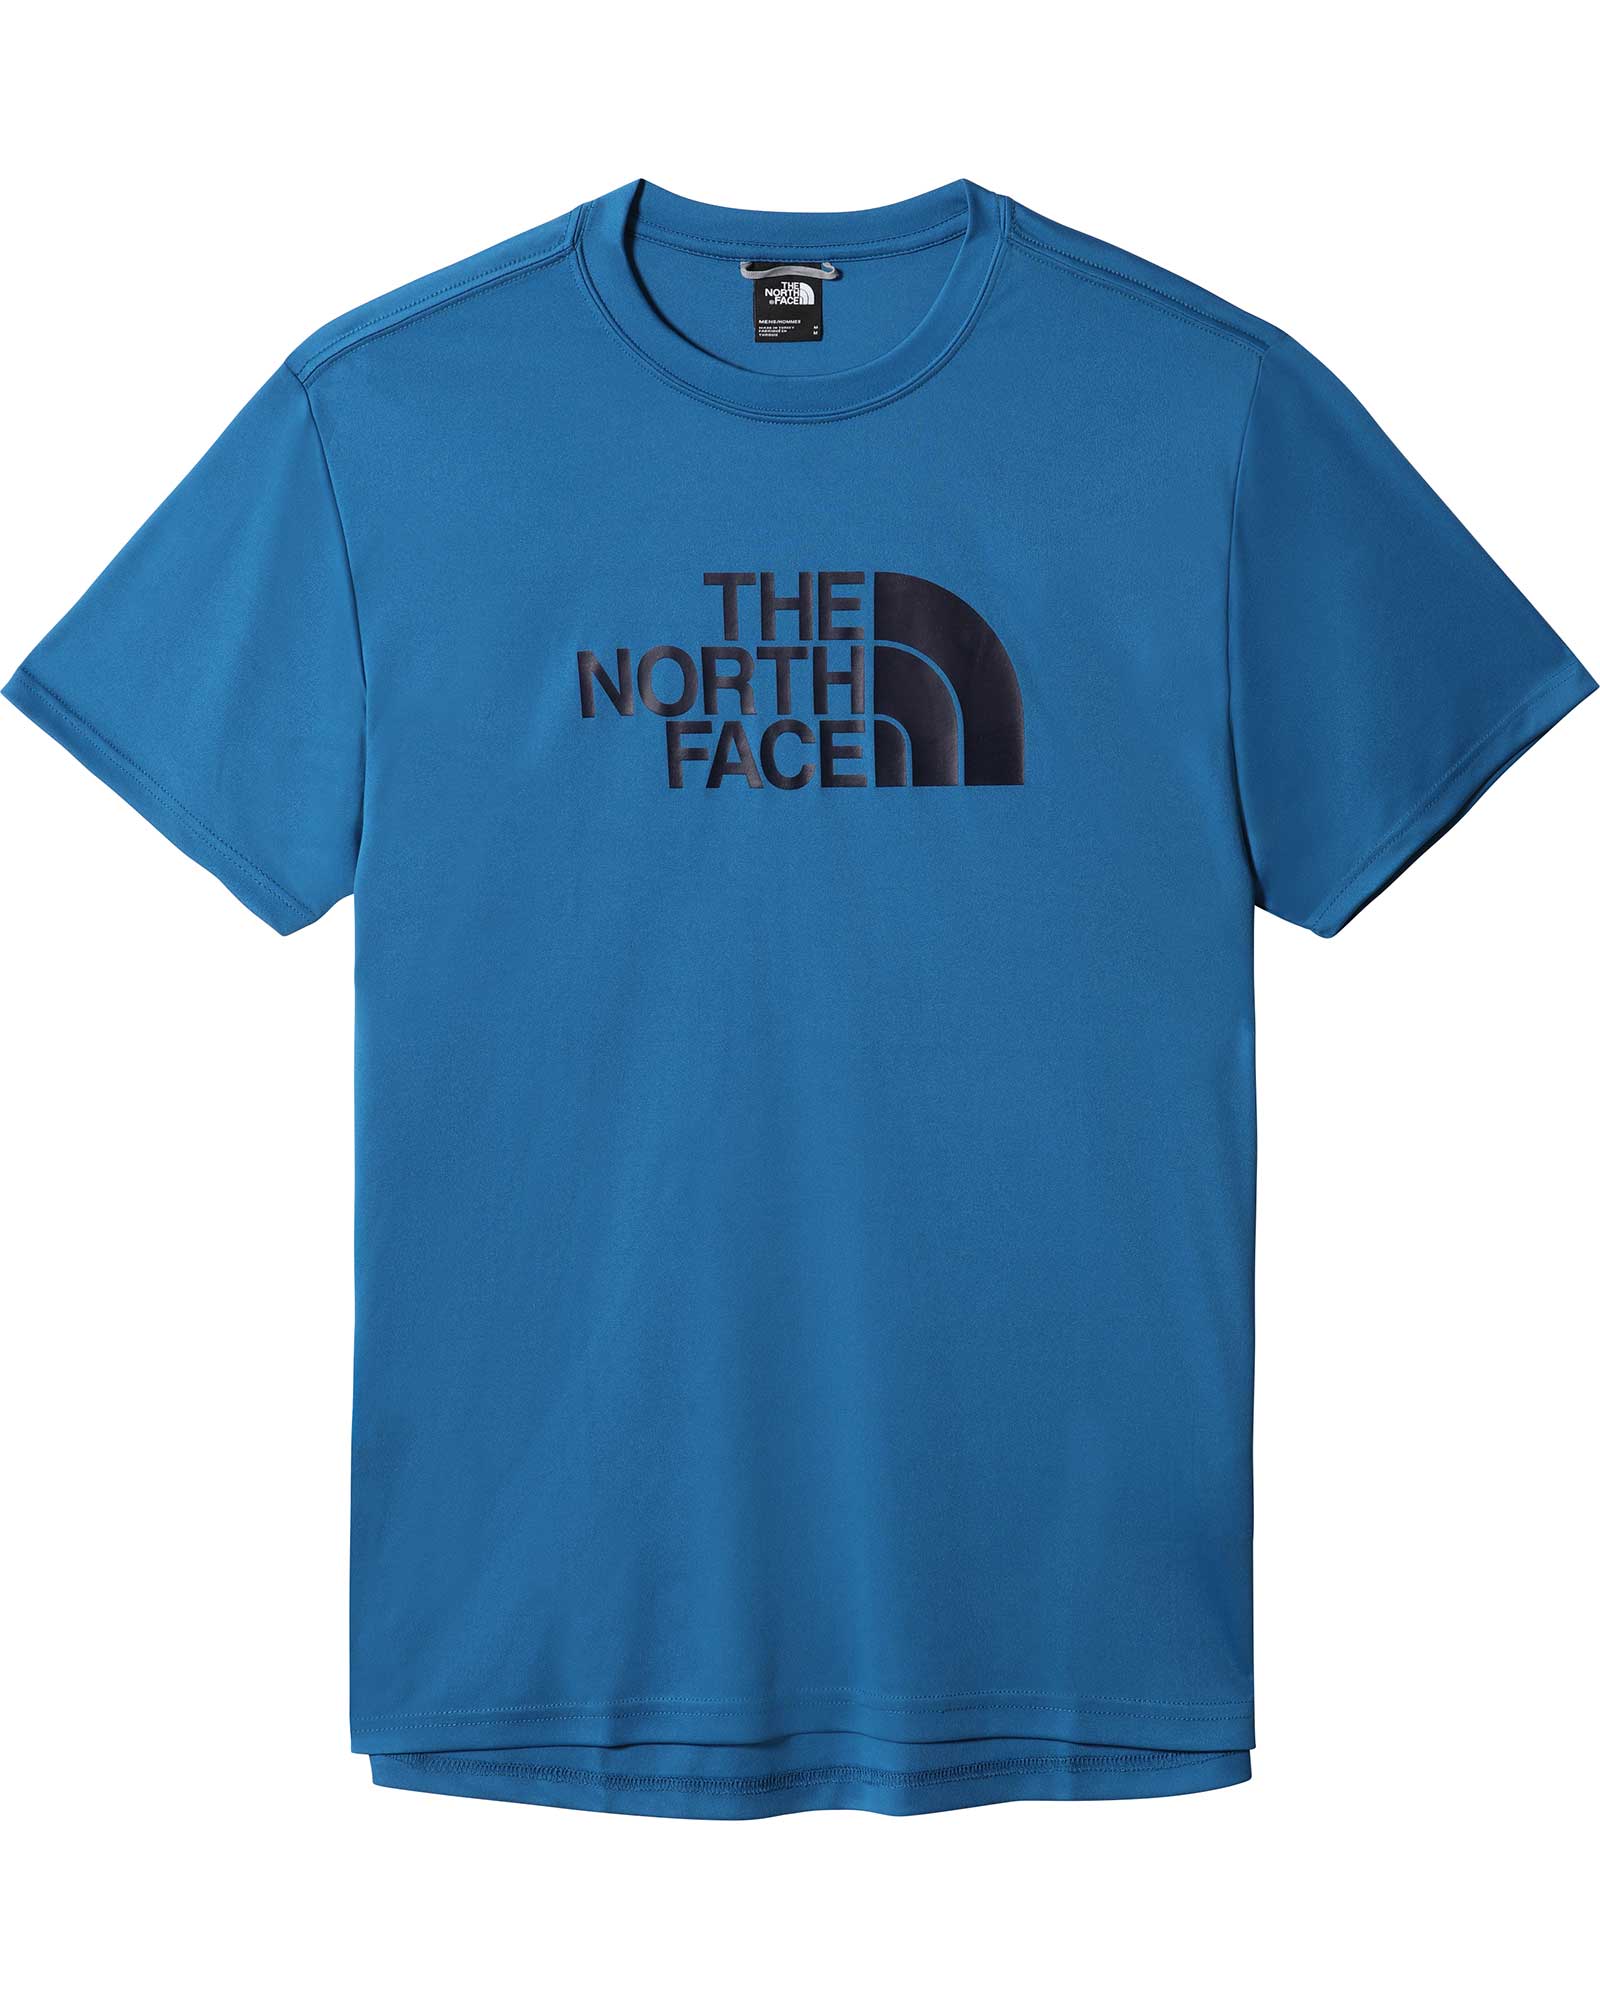 Product image of The North Face Reaxion easy Men's T-Shirt